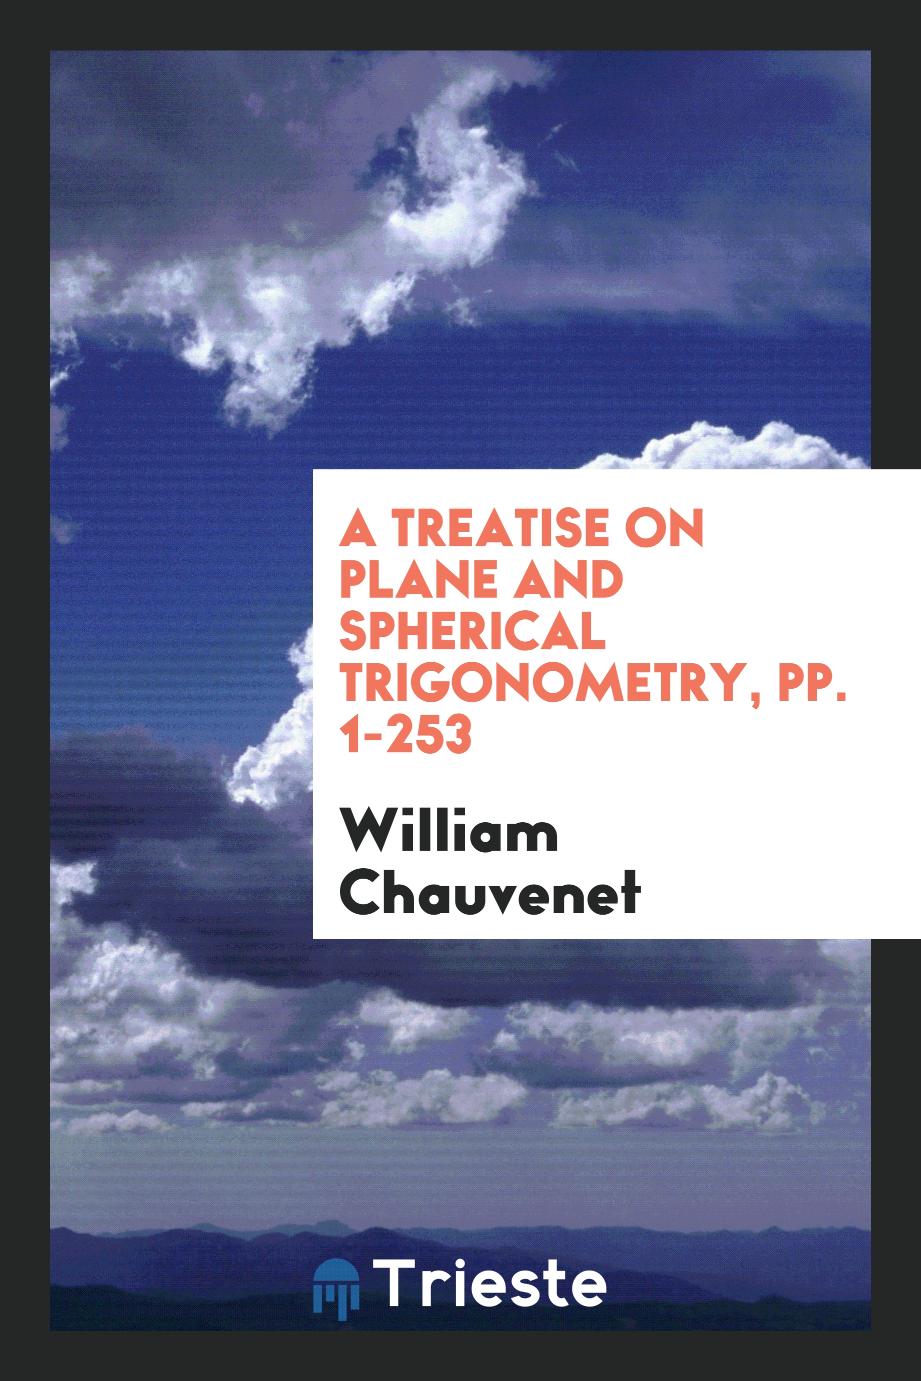 A Treatise on Plane and Spherical Trigonometry, pp. 1-253